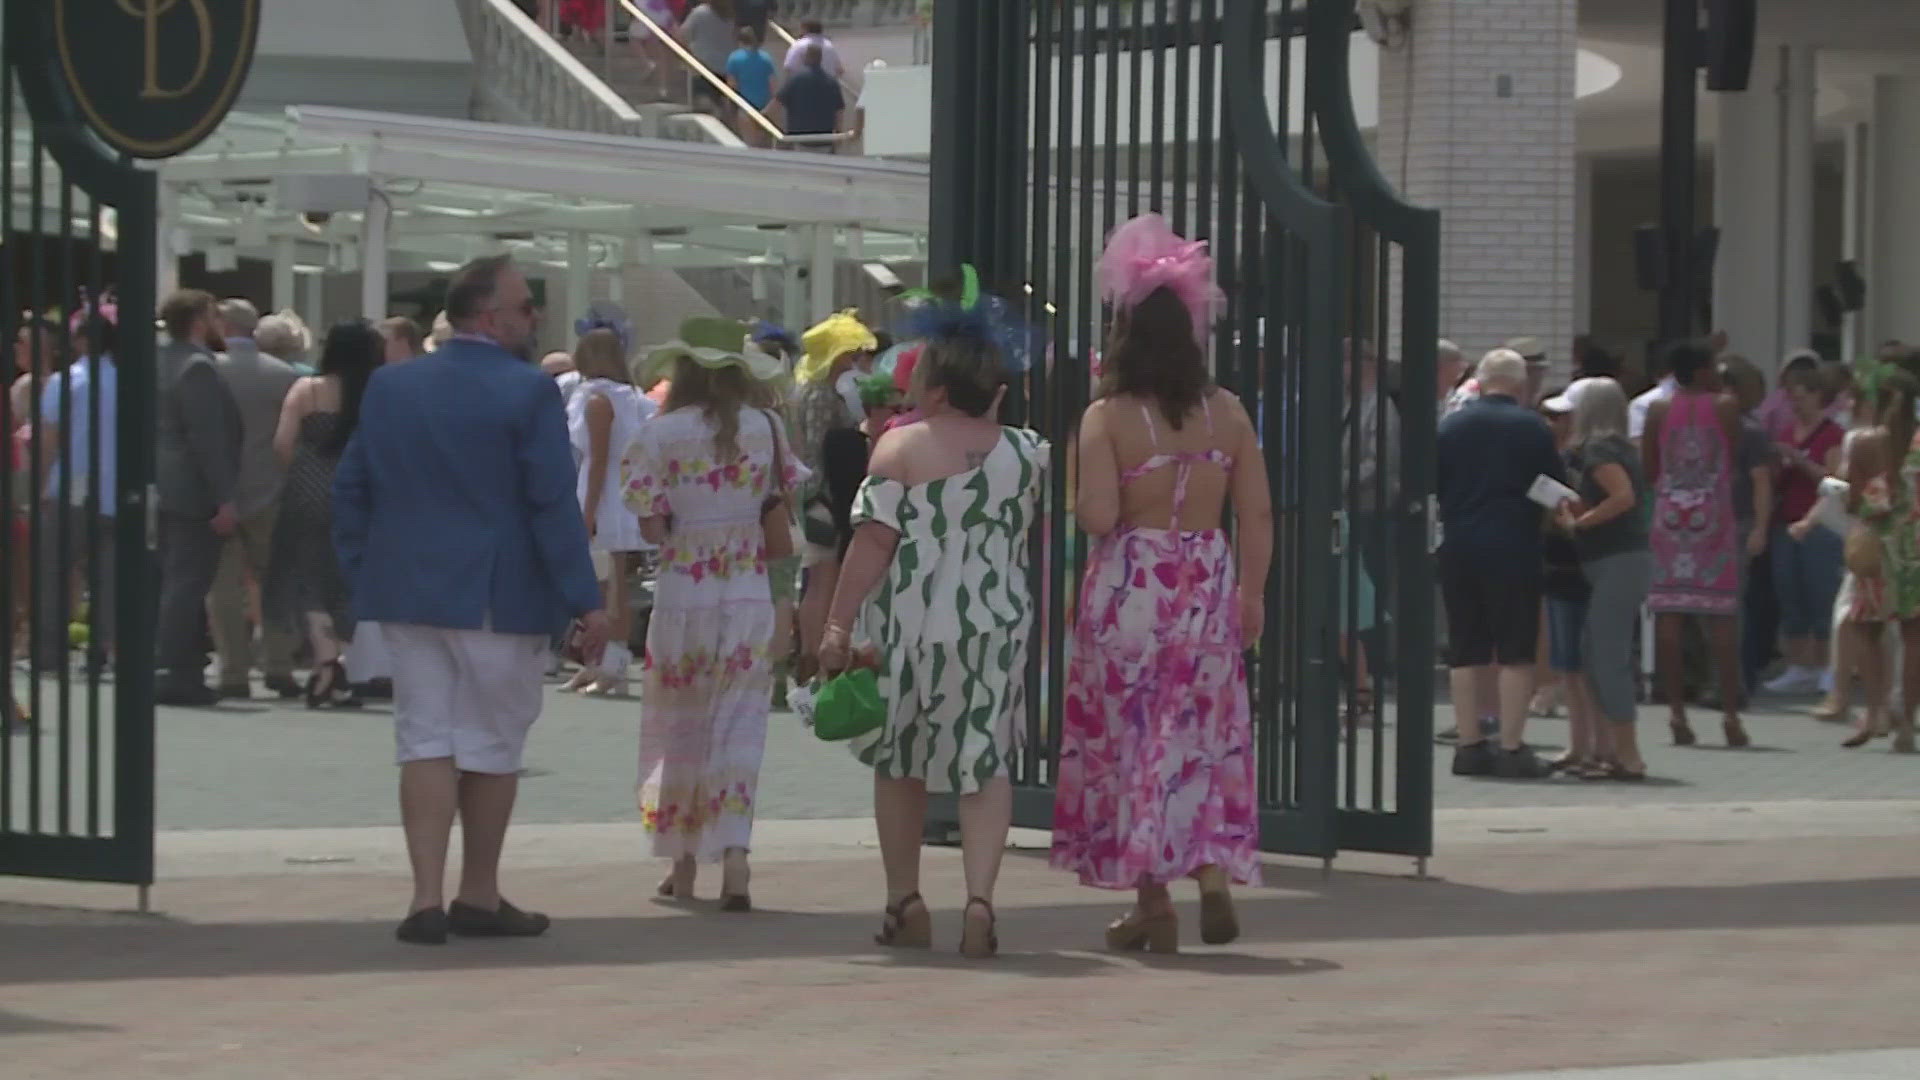 The day is dedicated to Louisville horse racing fans who want to take in the sights and sounds of Churchill Downs without the large crowds.